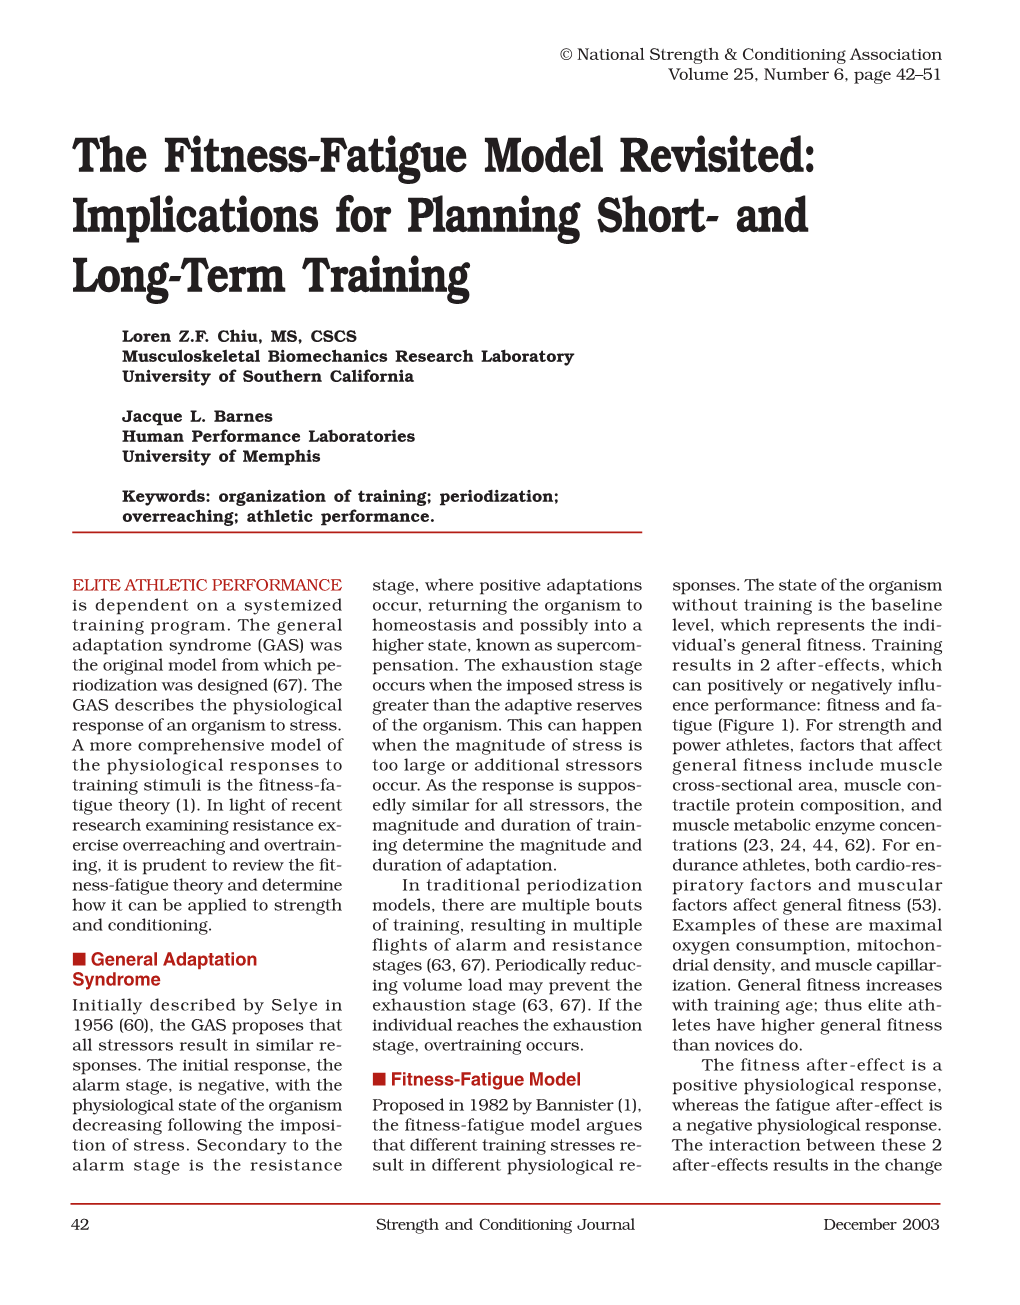 The Fitness-Fatigue Model Revisited: Implications for Planning Short- and Long-Term Training